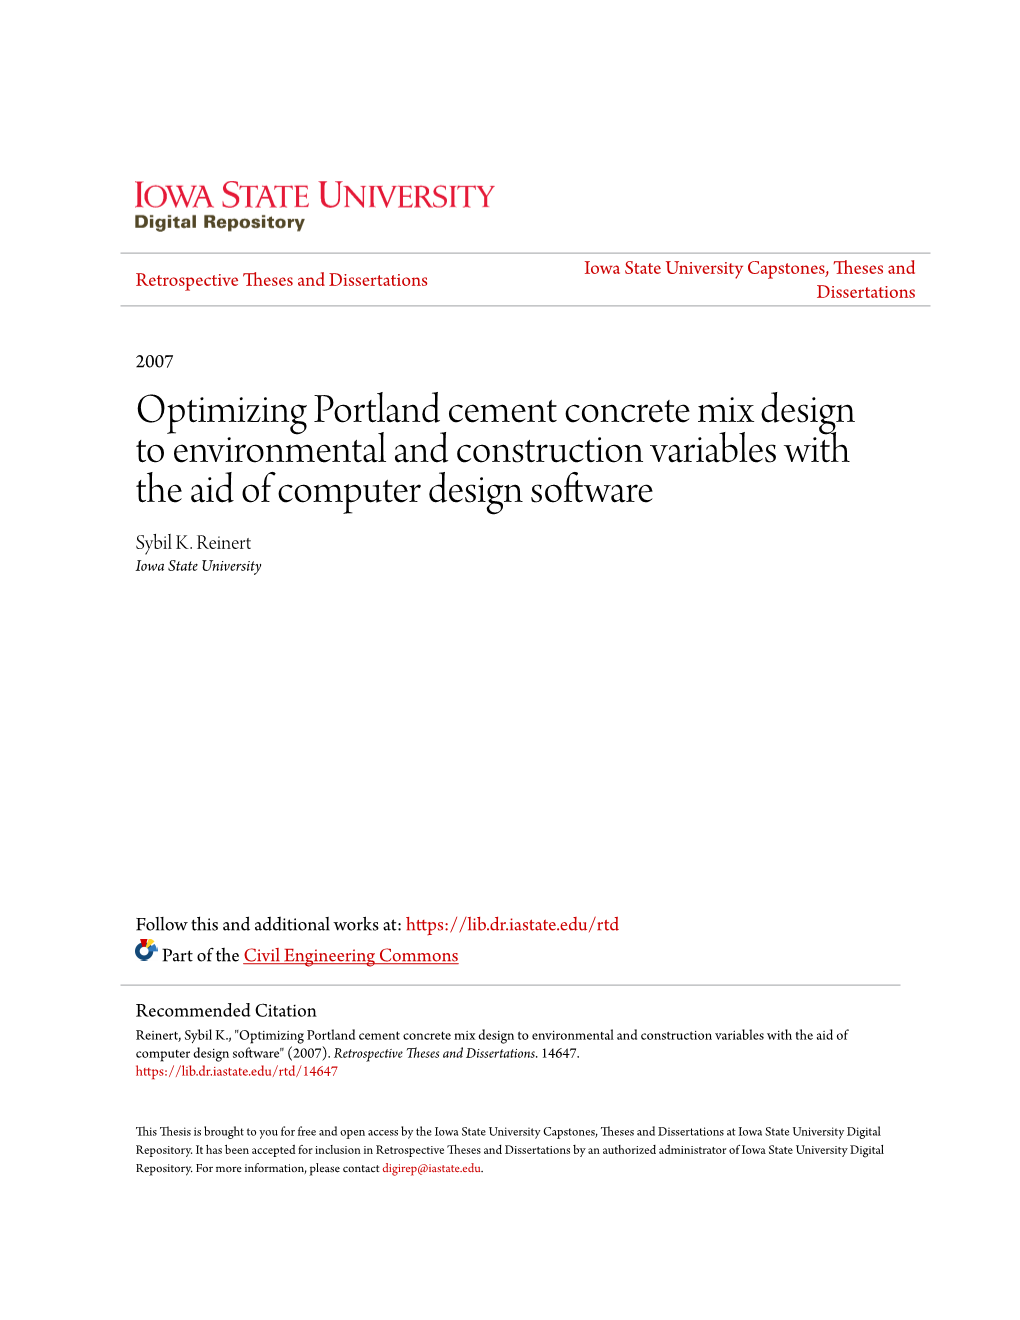 Optimizing Portland Cement Concrete Mix Design to Environmental and Construction Variables with the Aid of Computer Design Software Sybil K